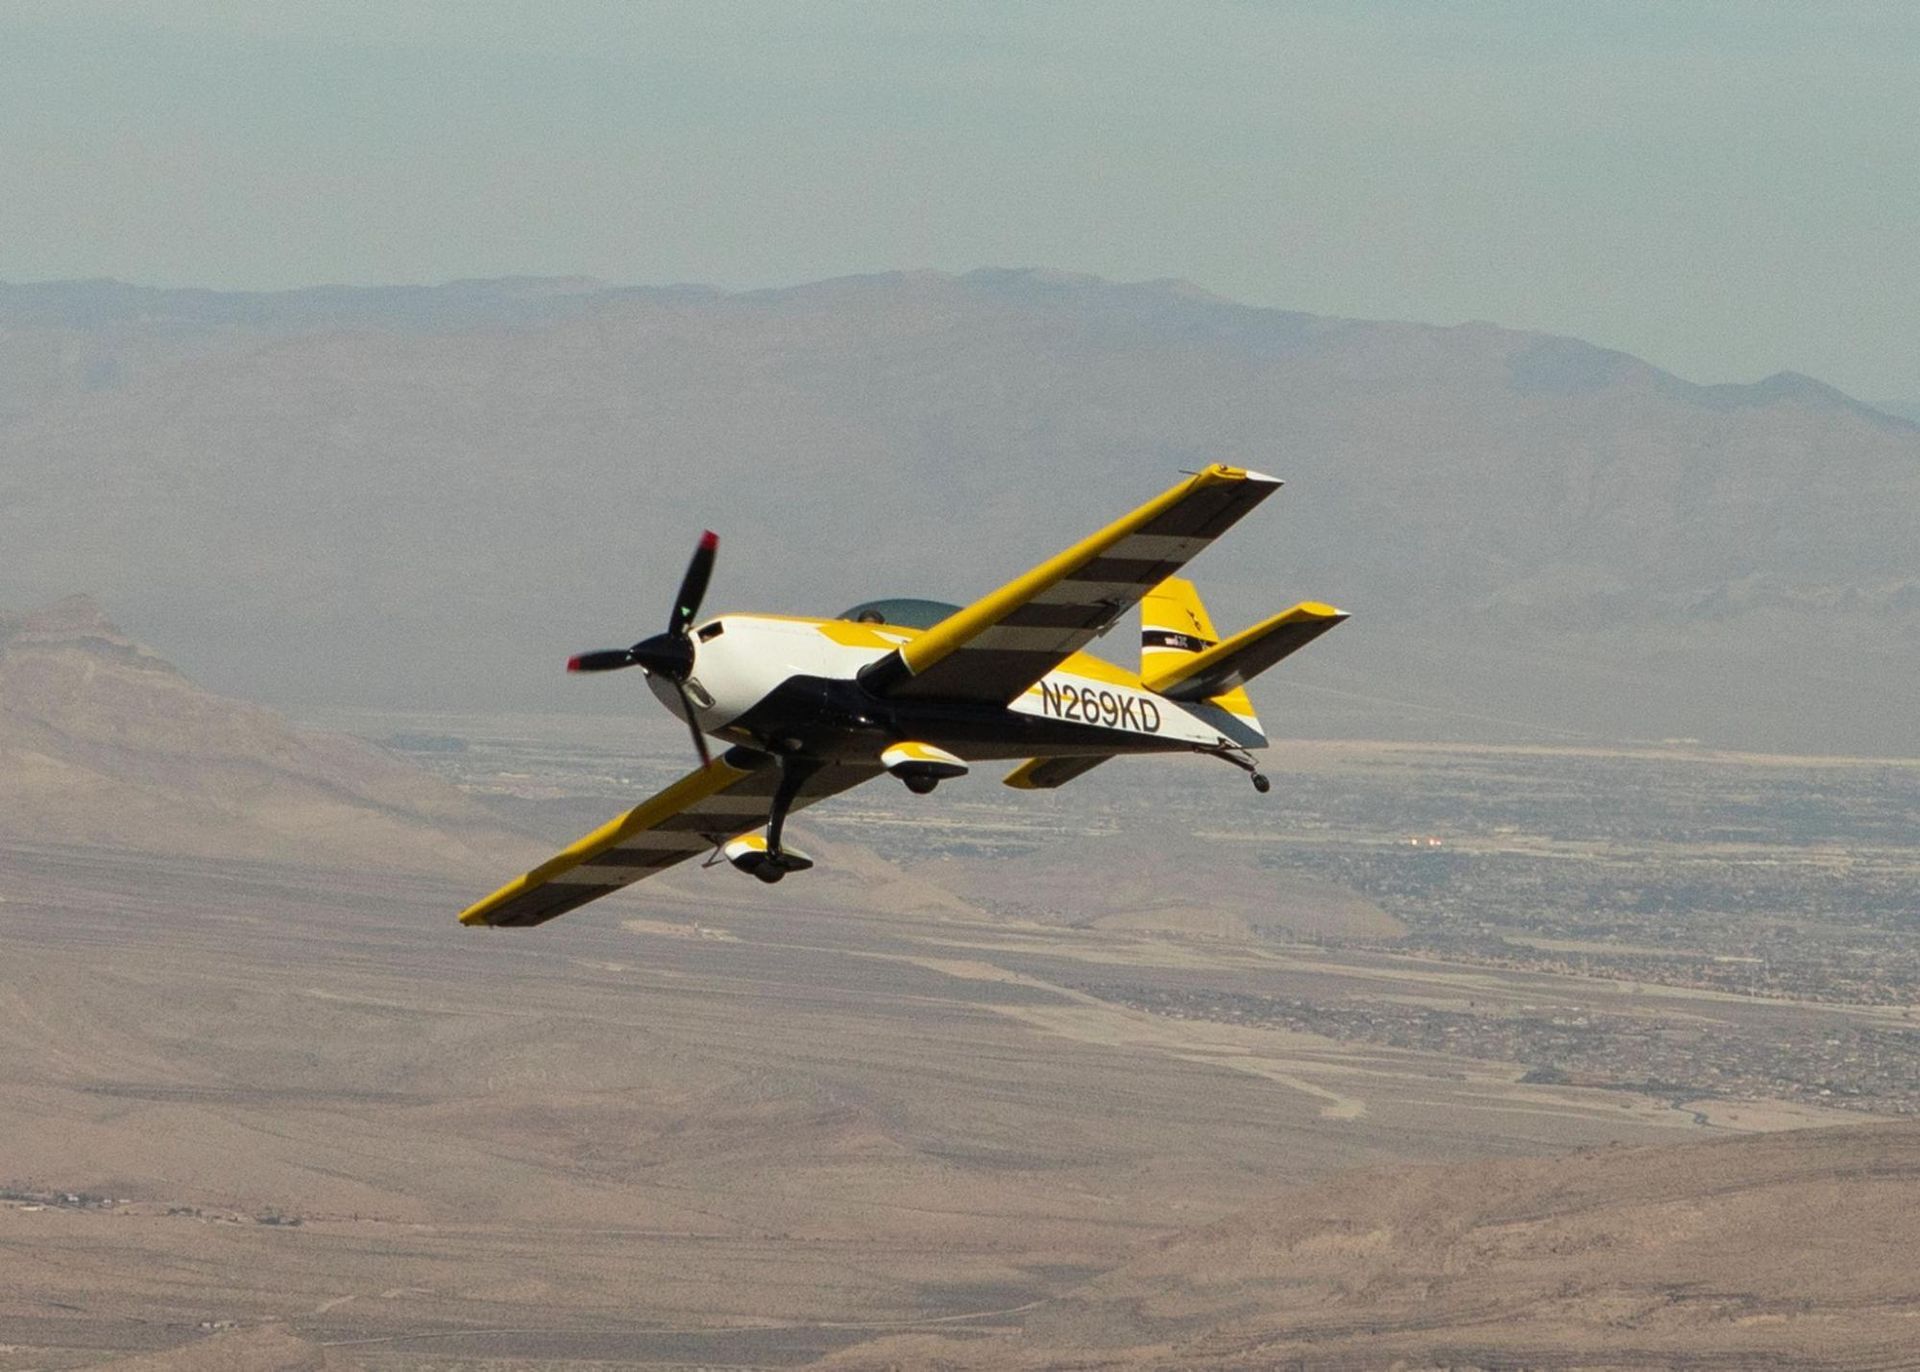 A yellow Sky Combat Ace airplane in air during an aerial combat experience.